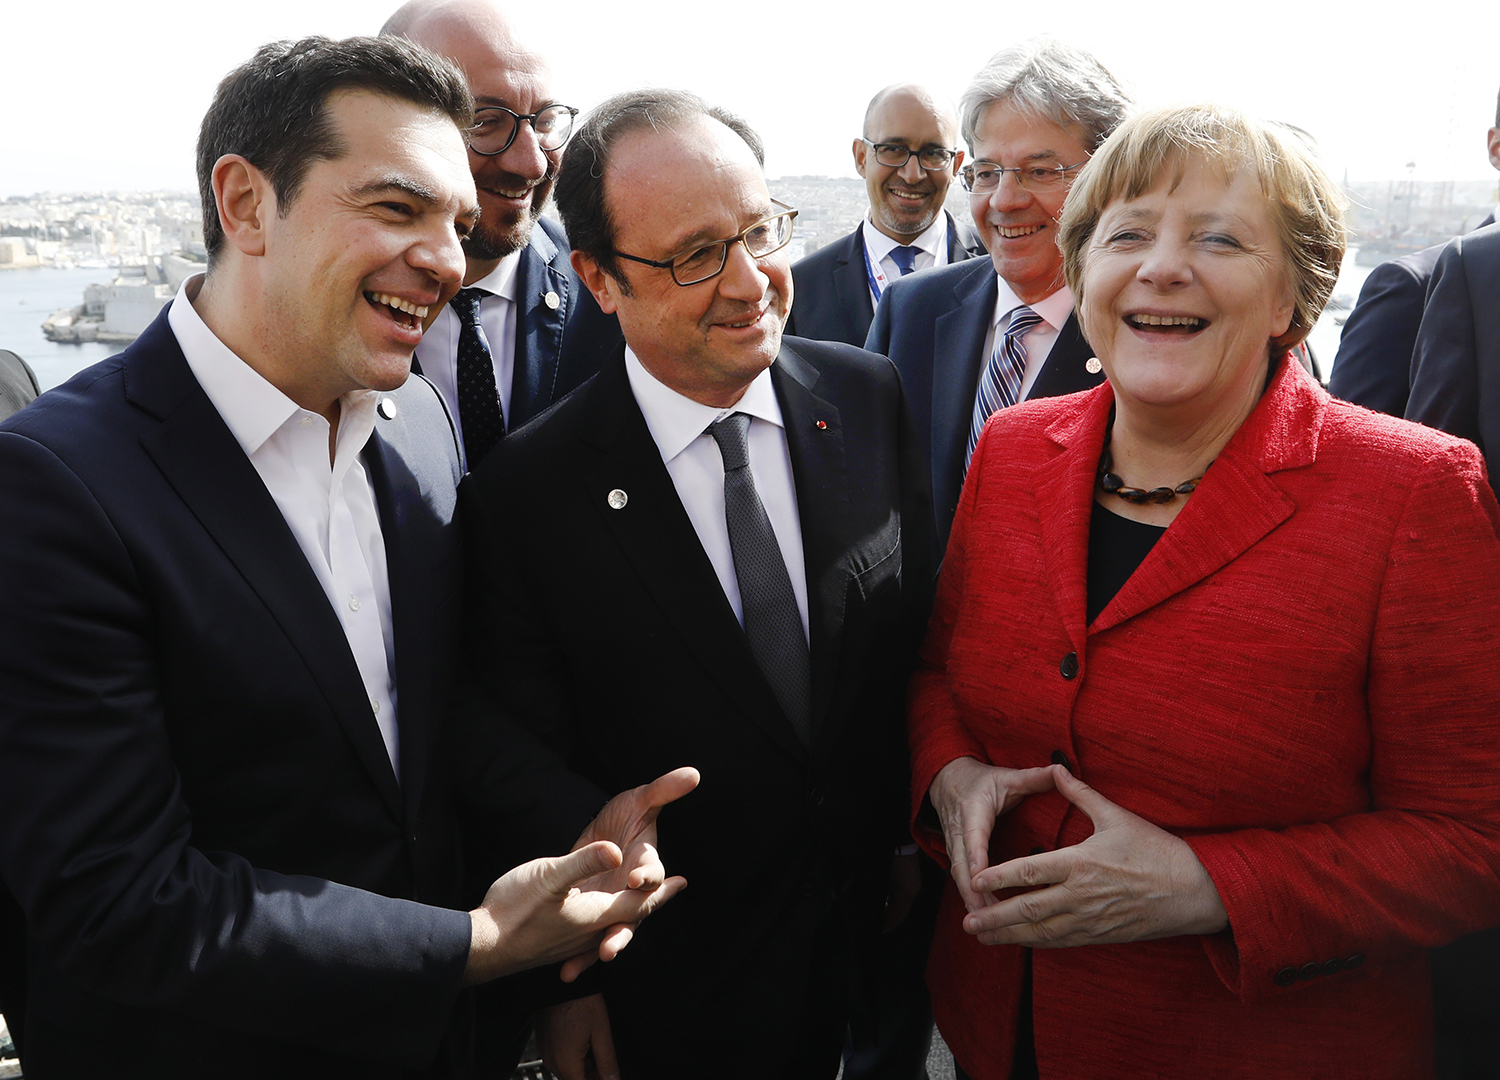 VALLETTA 2017-02-03 L-R, Greek Prime Minister Alexis Tsipras, French President Francois Hollande and German Chancellor Angela Merkel visit a vantage point overlooking Valletta during a break in the European Union leaders summit in Valletta, Malta, February 3, 2017.     REUTERS/Yves Herman    TPX IMAGES OF THE DAY Photo:  / REUTERS / TT / kod 72000